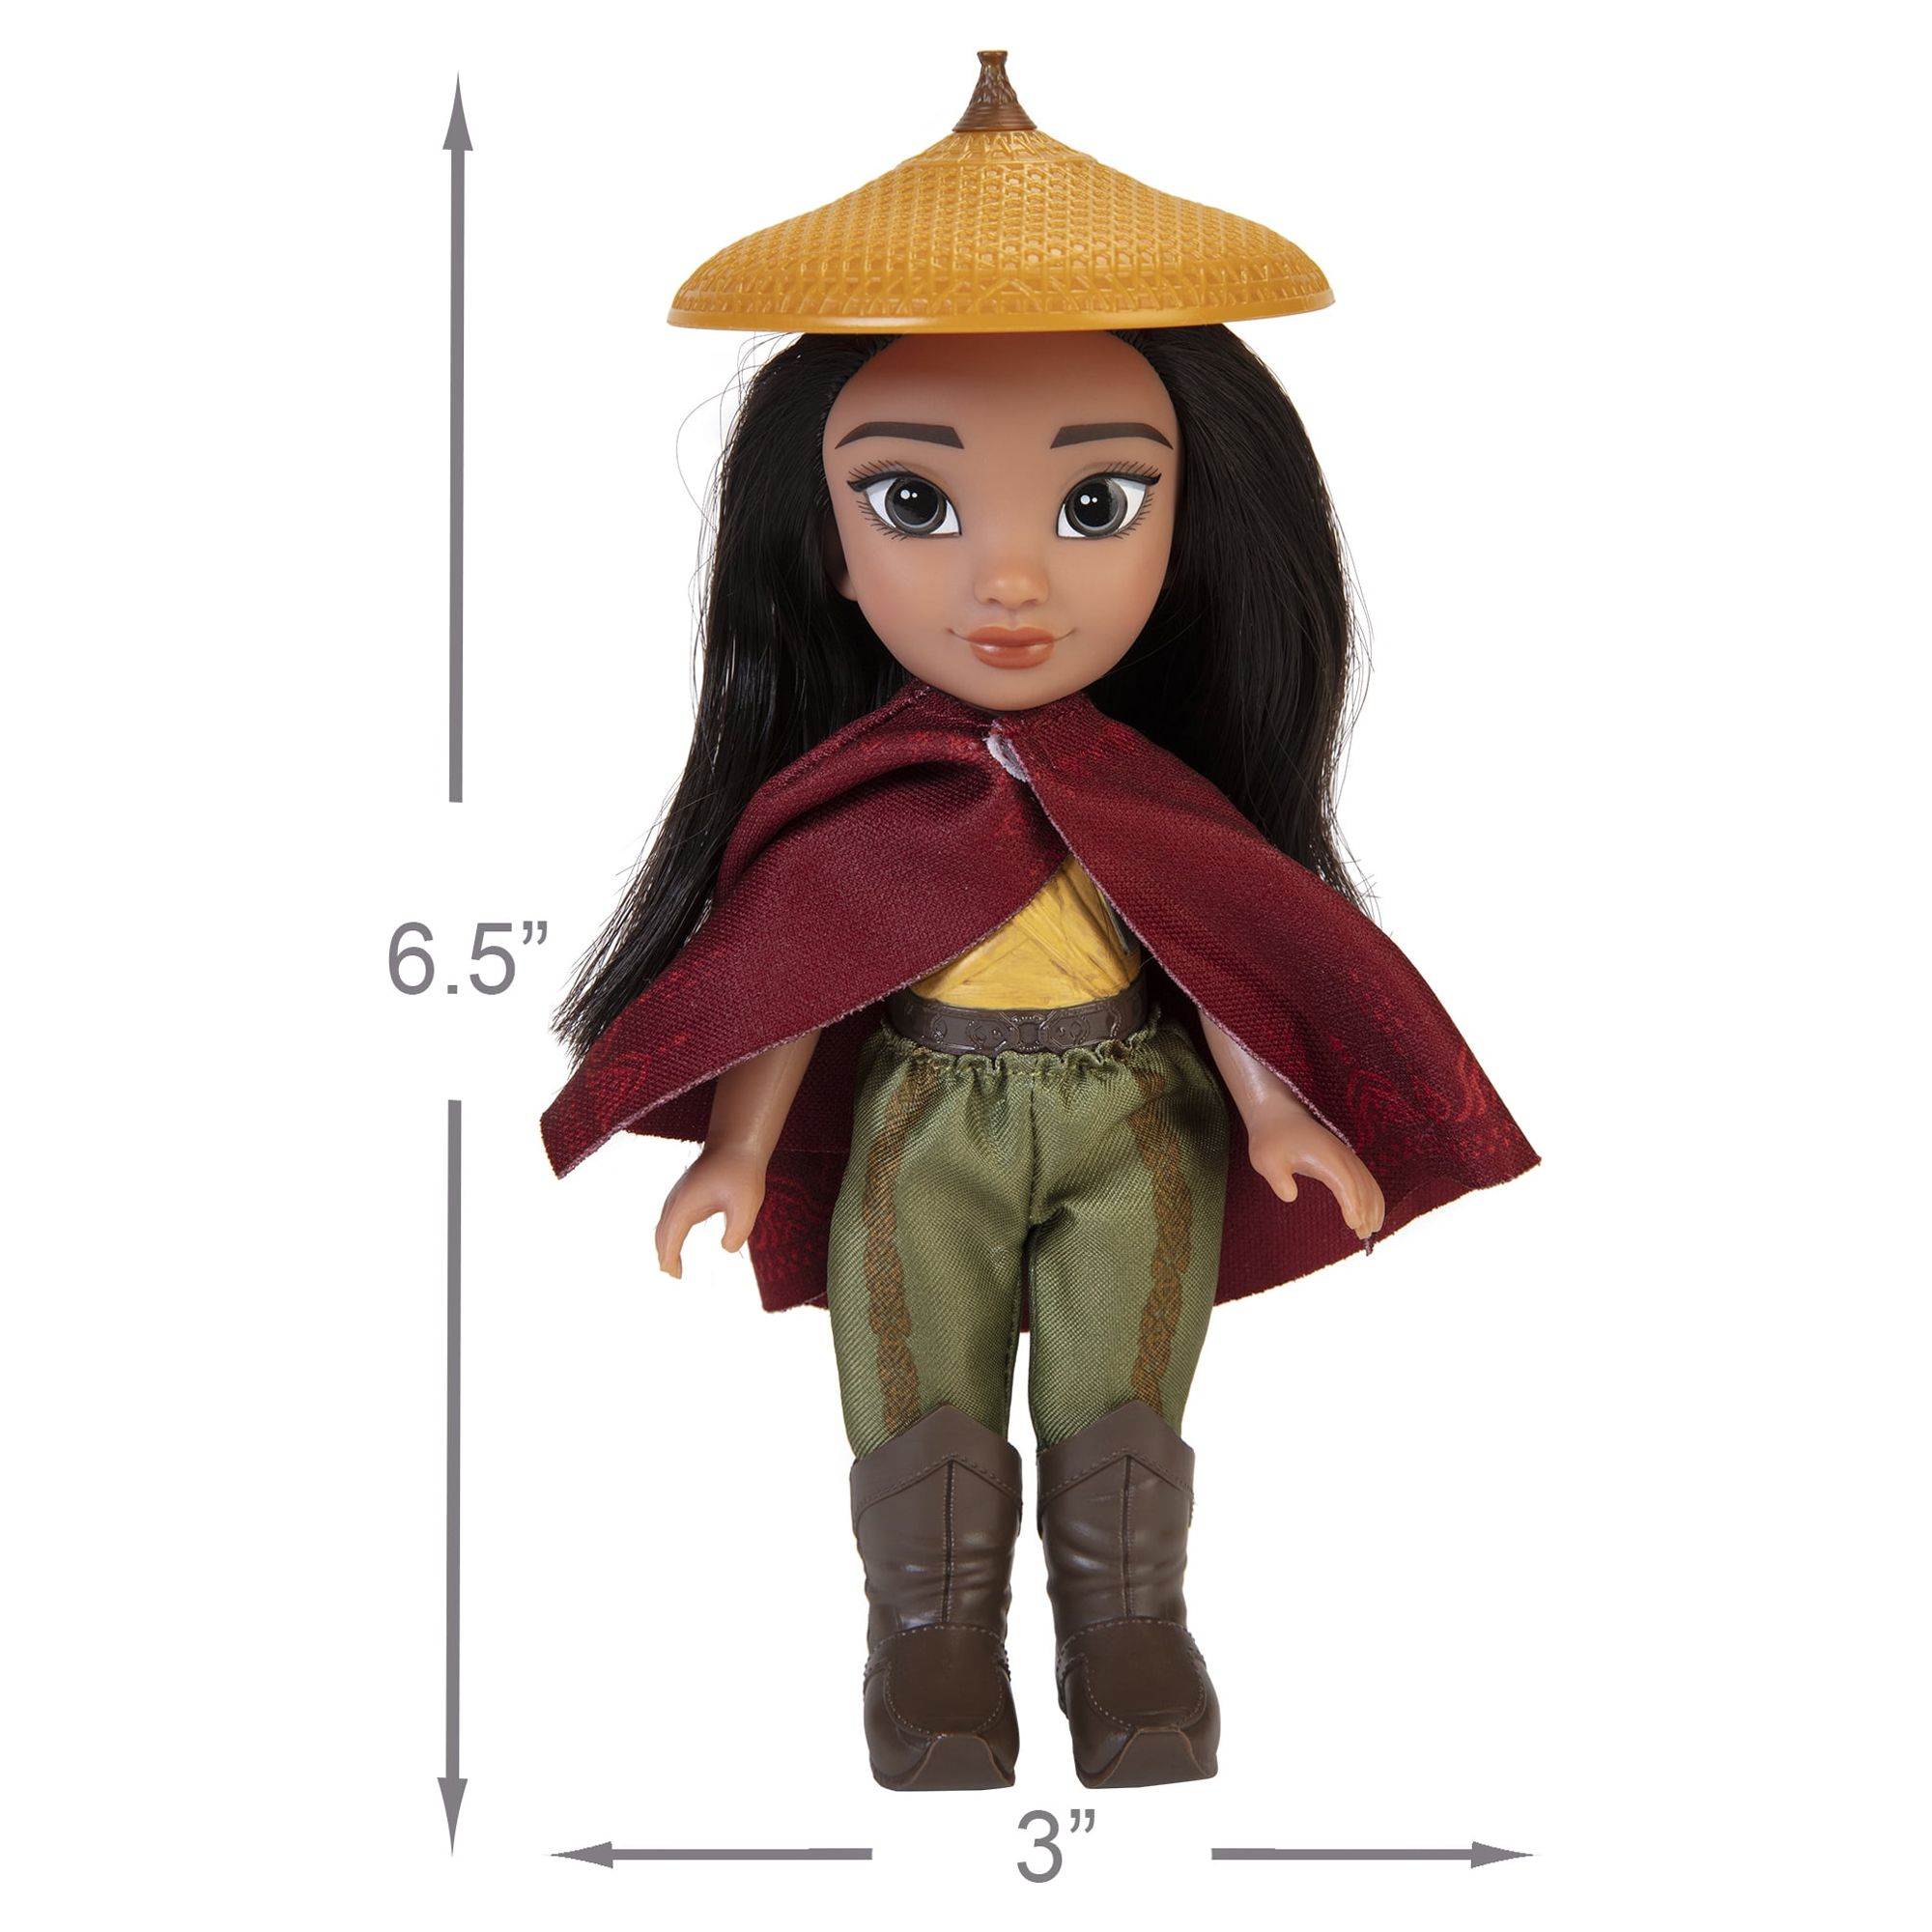 Raya and the Last Dragon 6" Petite Raya Doll Playset, 5 Pieces Included - image 1 of 11